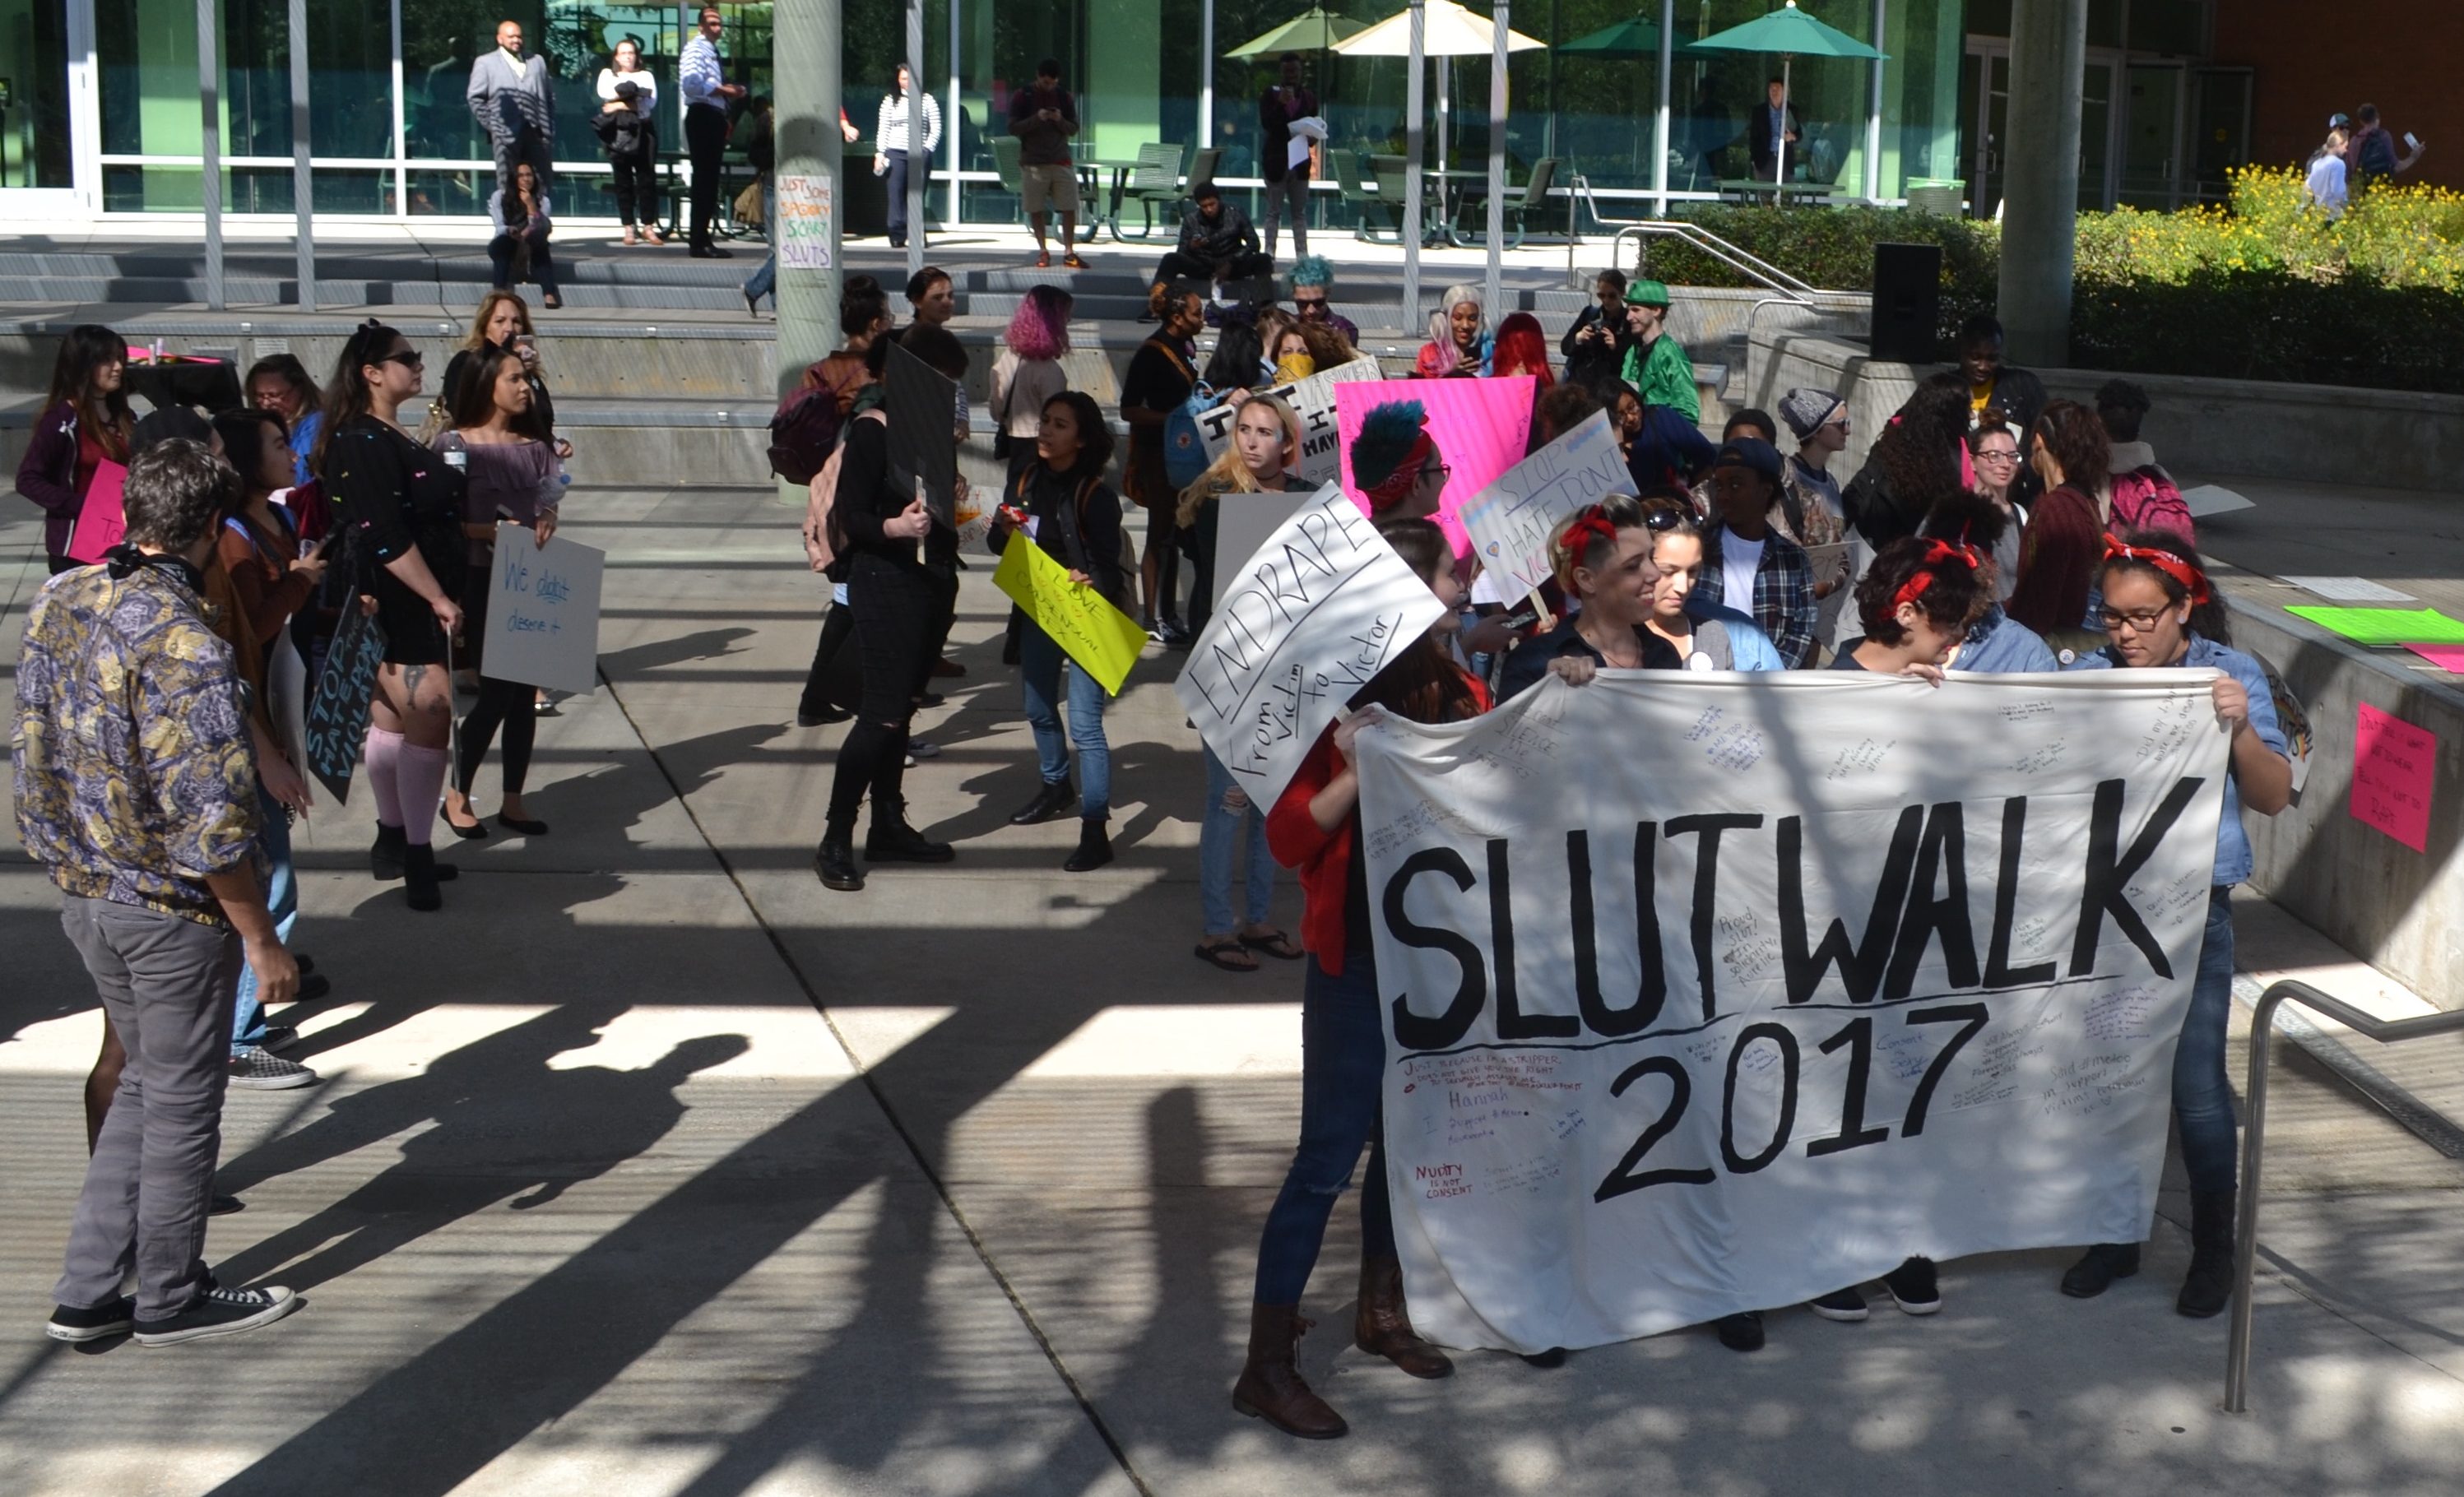 Safe HOME at University of South Florida hosts first annual Slut Walk